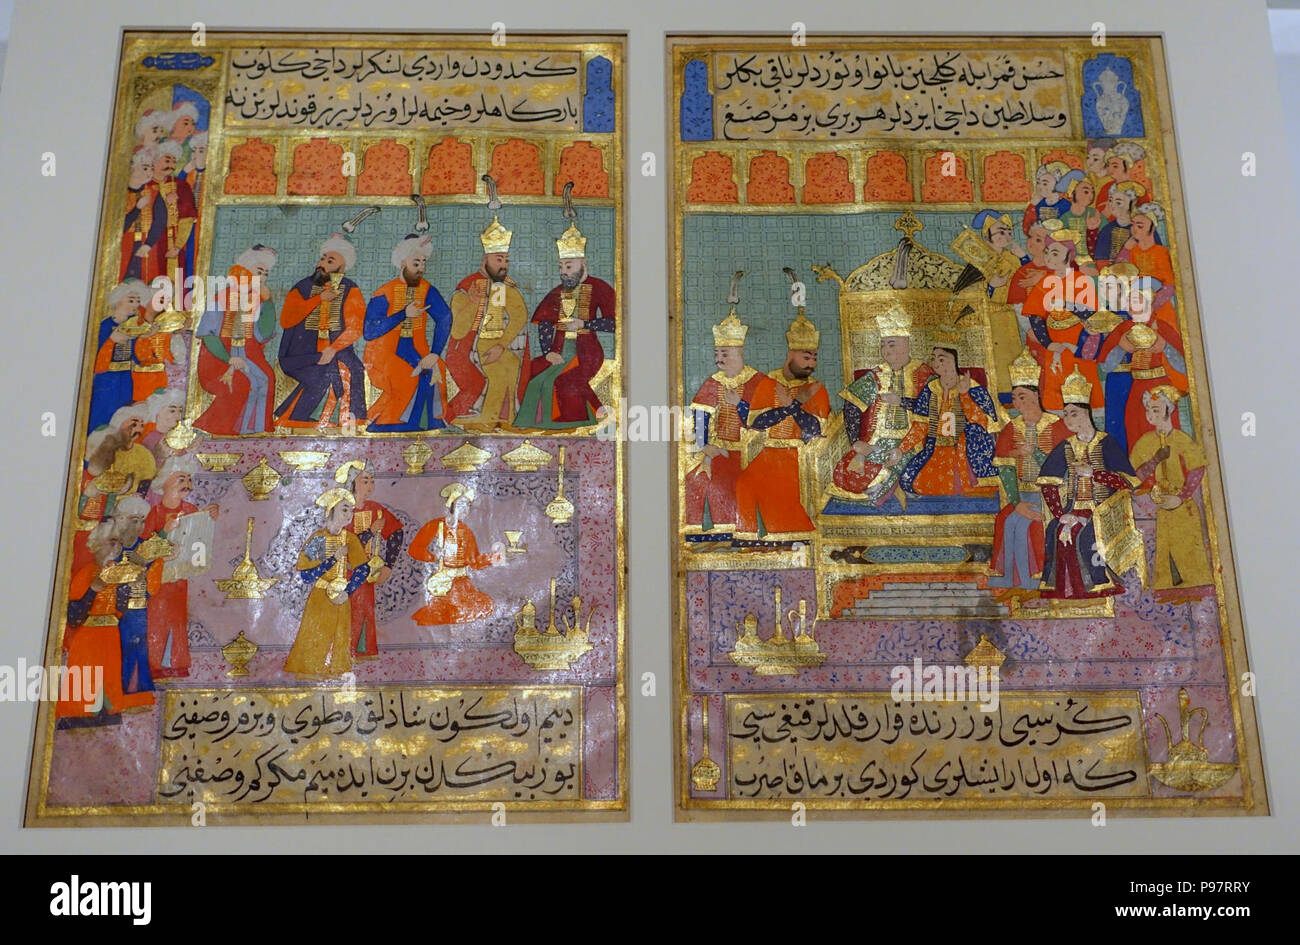 A king and queen enthroned, folio from Tuhfet ul-Leta'if (Curious and Witty Gifts) by 'Ali ibn Naqib Hamza, Turkey, 1593-1594 AD, ink, colour, gold on paper - Aga Khan Museum - Toronto, Canada - DSC06759. Stock Photo